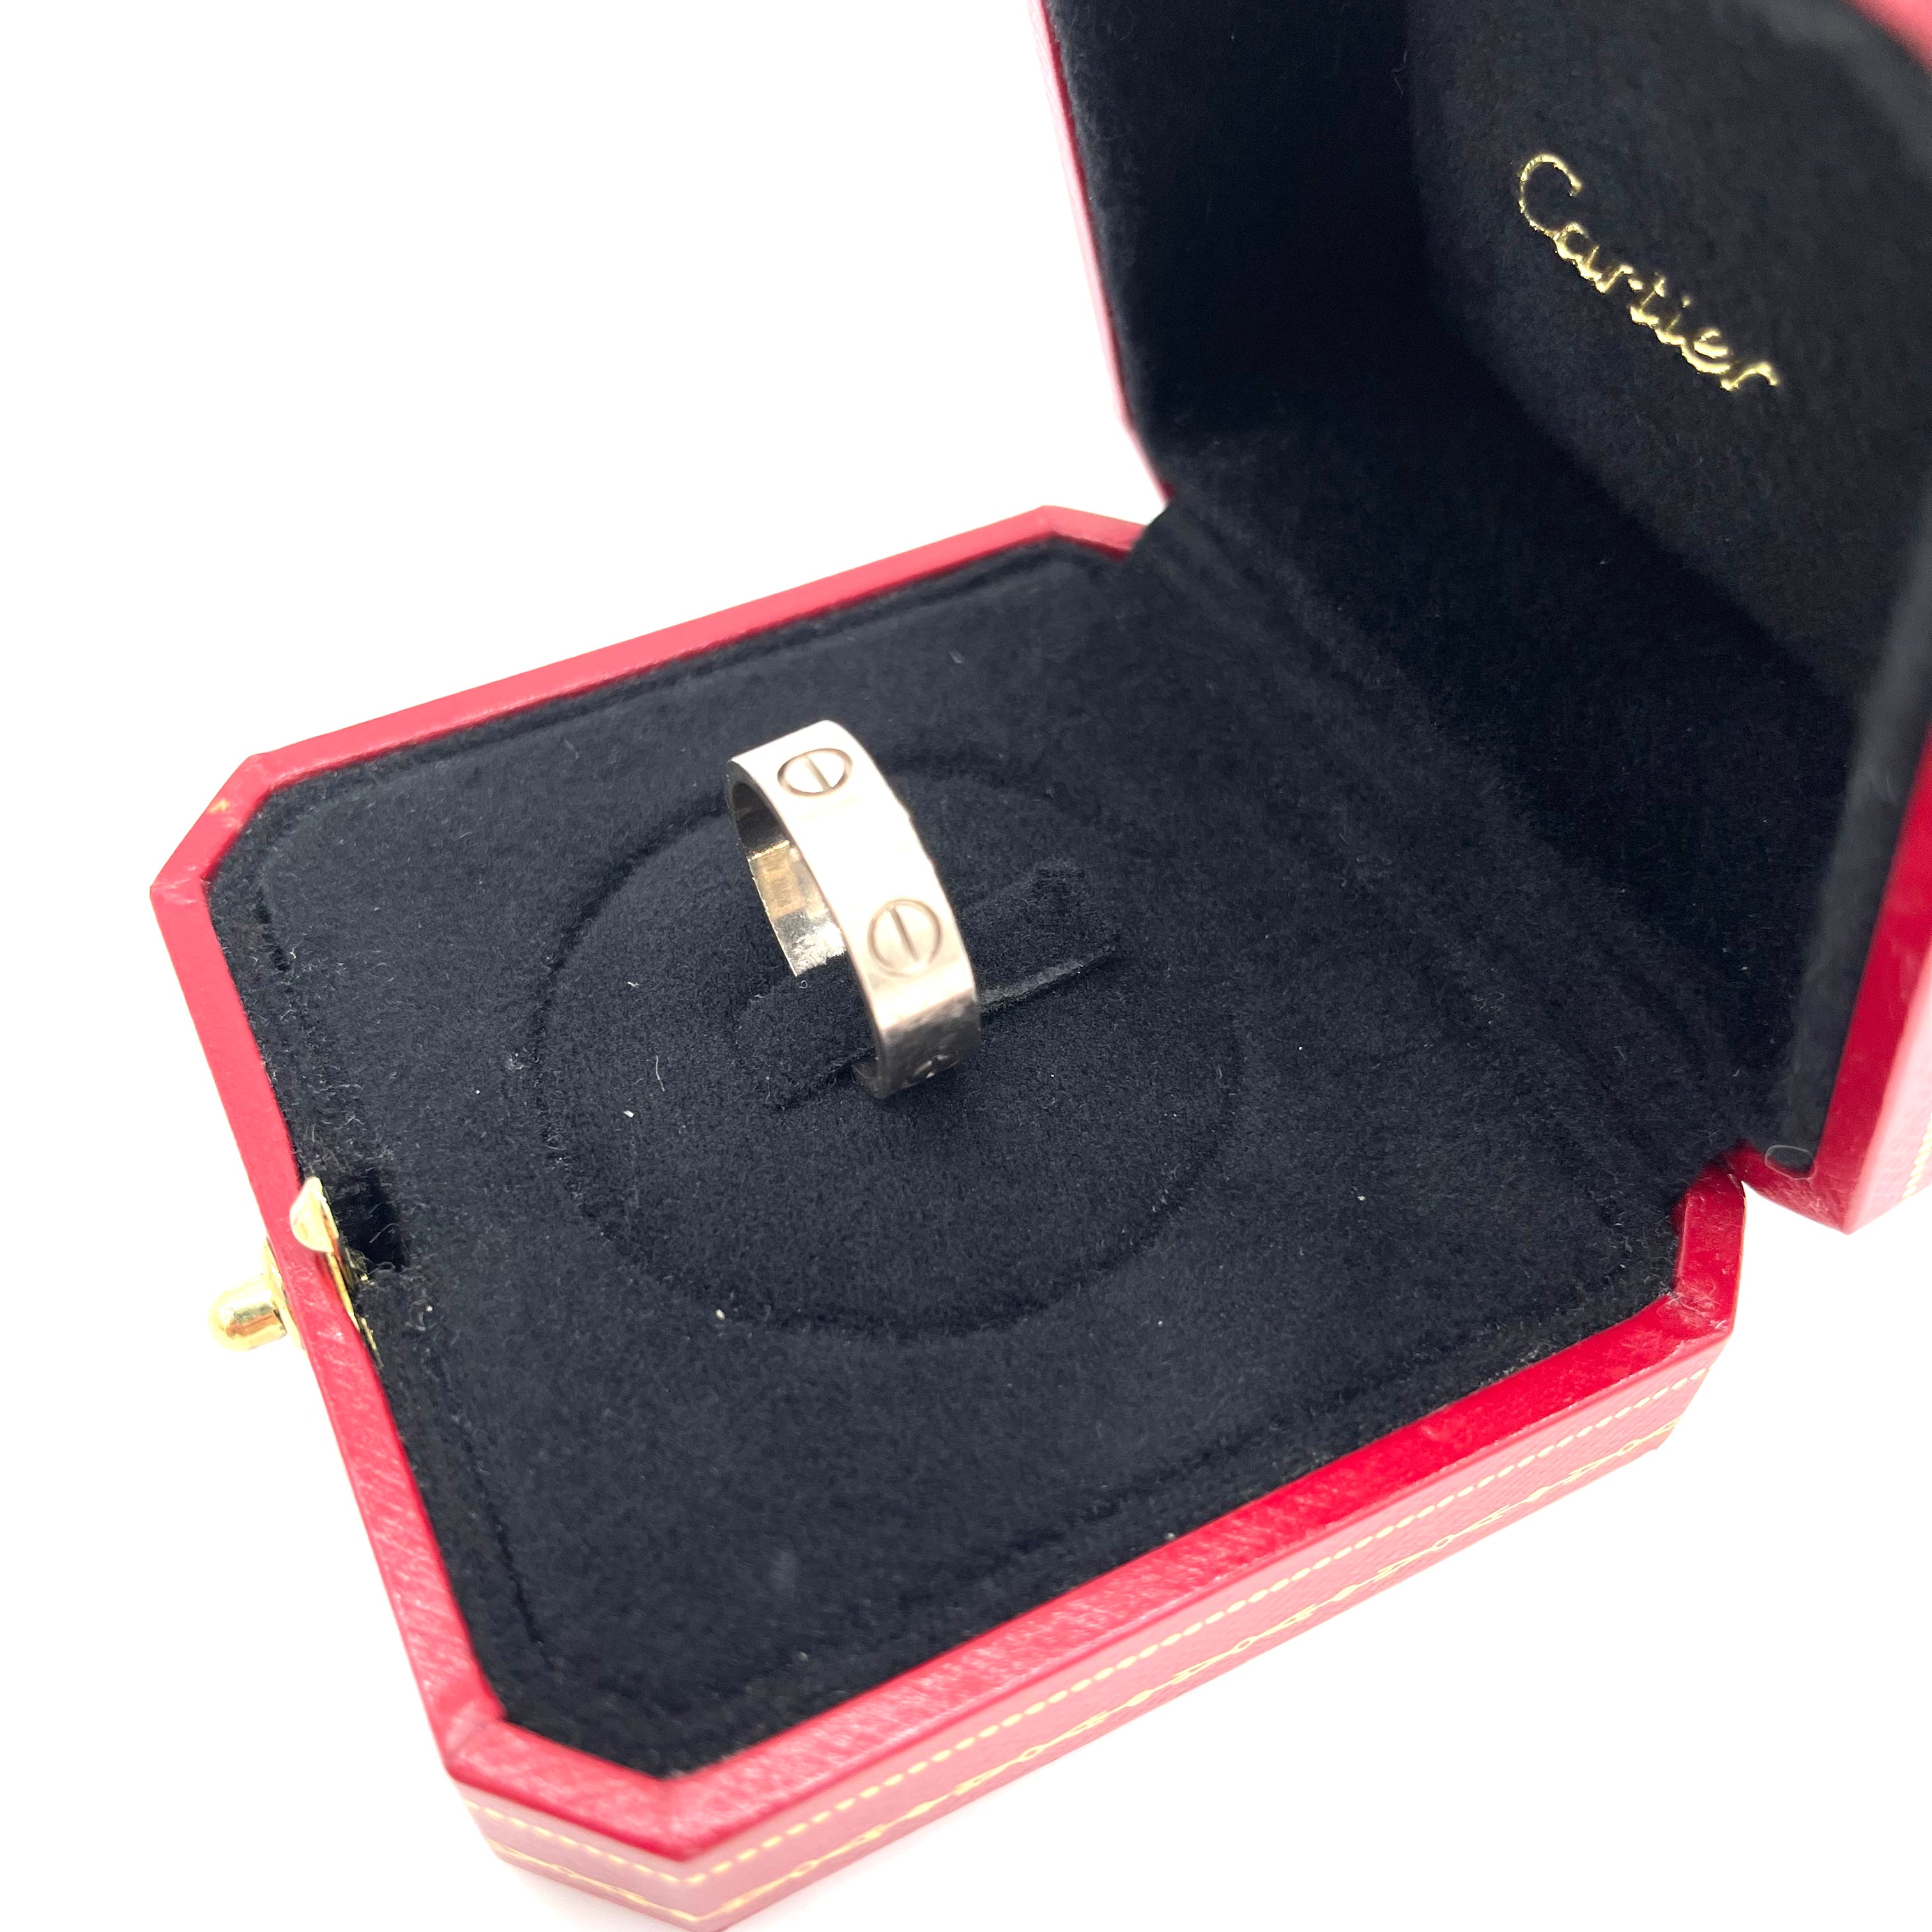 CARTIER LOVE RING SIZE54 18K WHITE GOLD